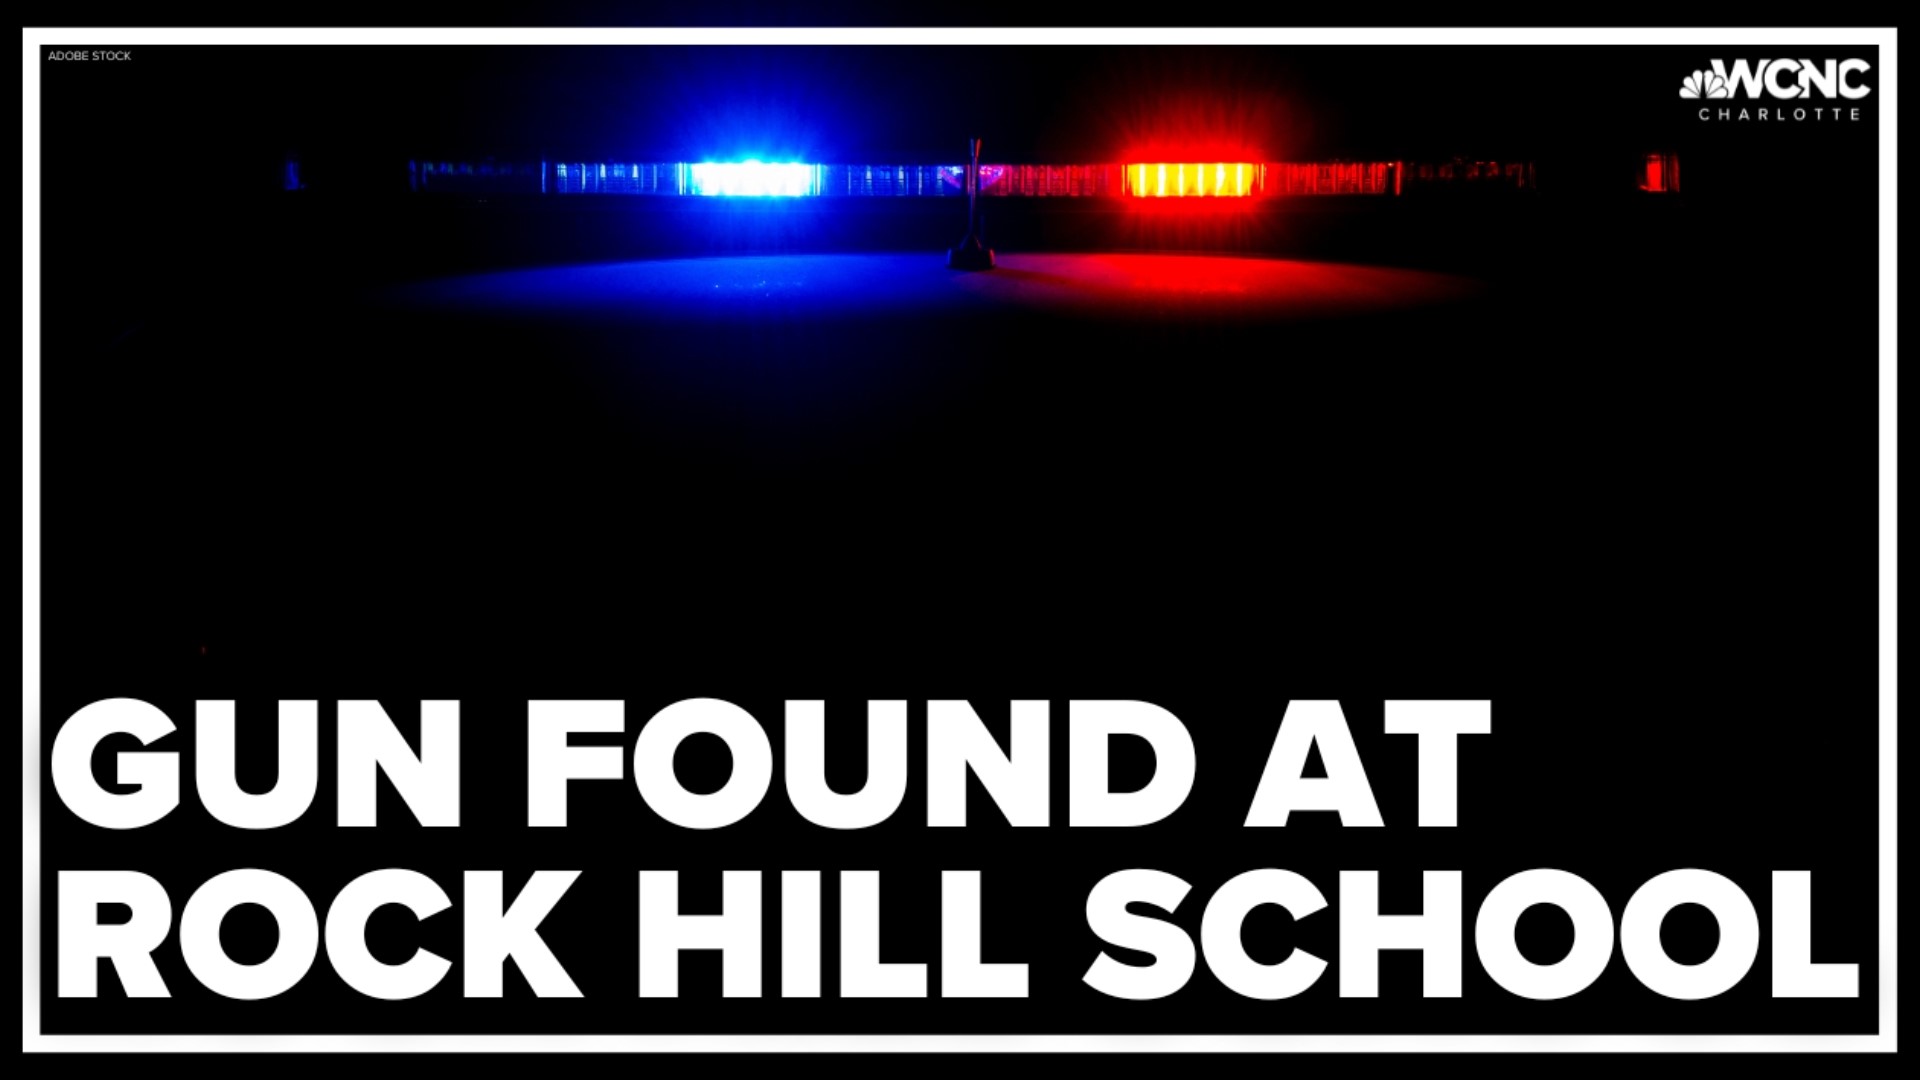 A 14-year-old student is now in juvenile custody after the Rock Hill Police Department said the teen aimed a gun at other students during a fight Tuesday morning.